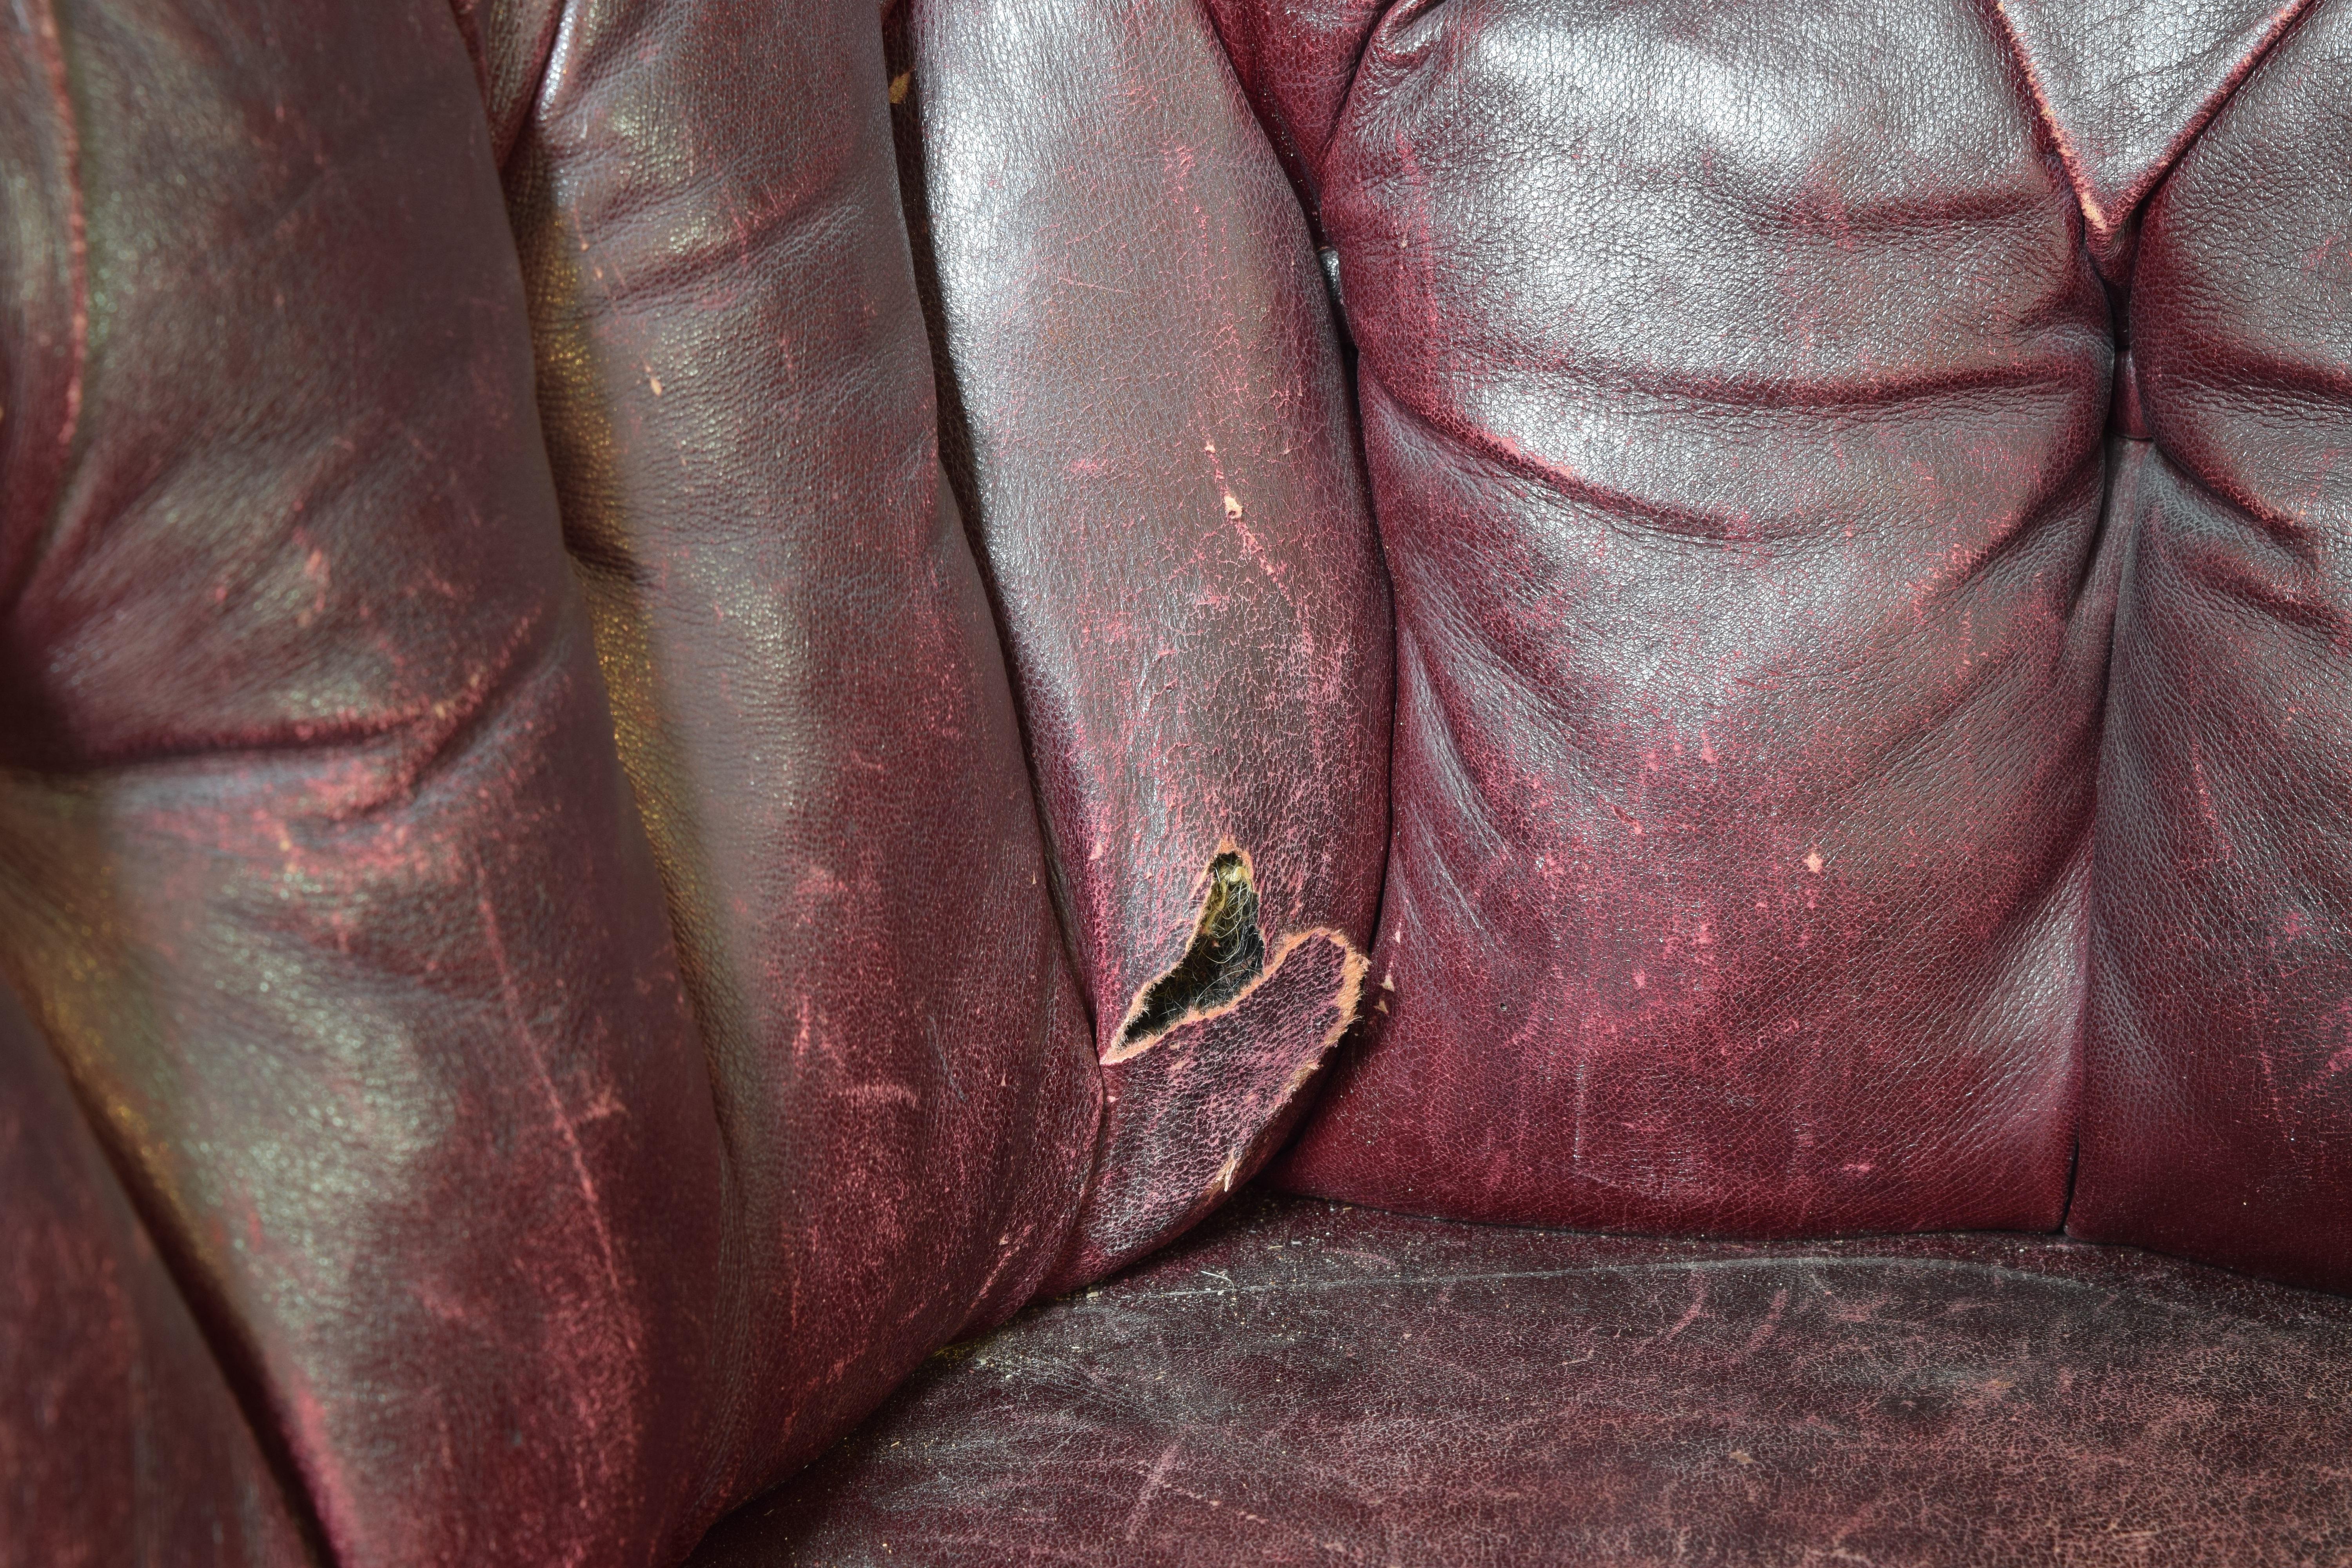 Italian Tufted Leather Upholstered Chesterfield Sofa, late 19thc For Sale 4